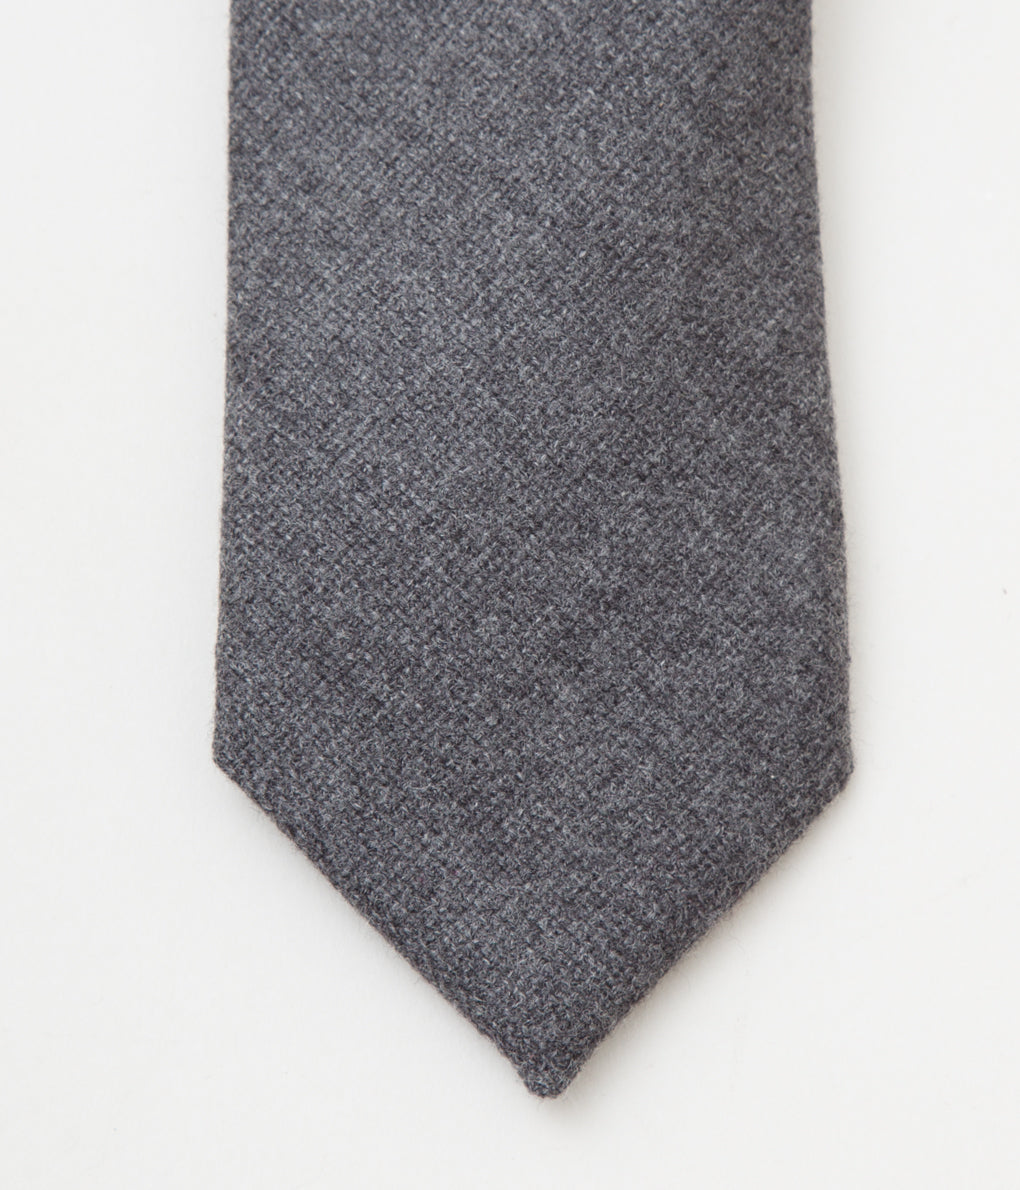 FINE AND DANDY "TIES"(CHARCOAL WOOL)